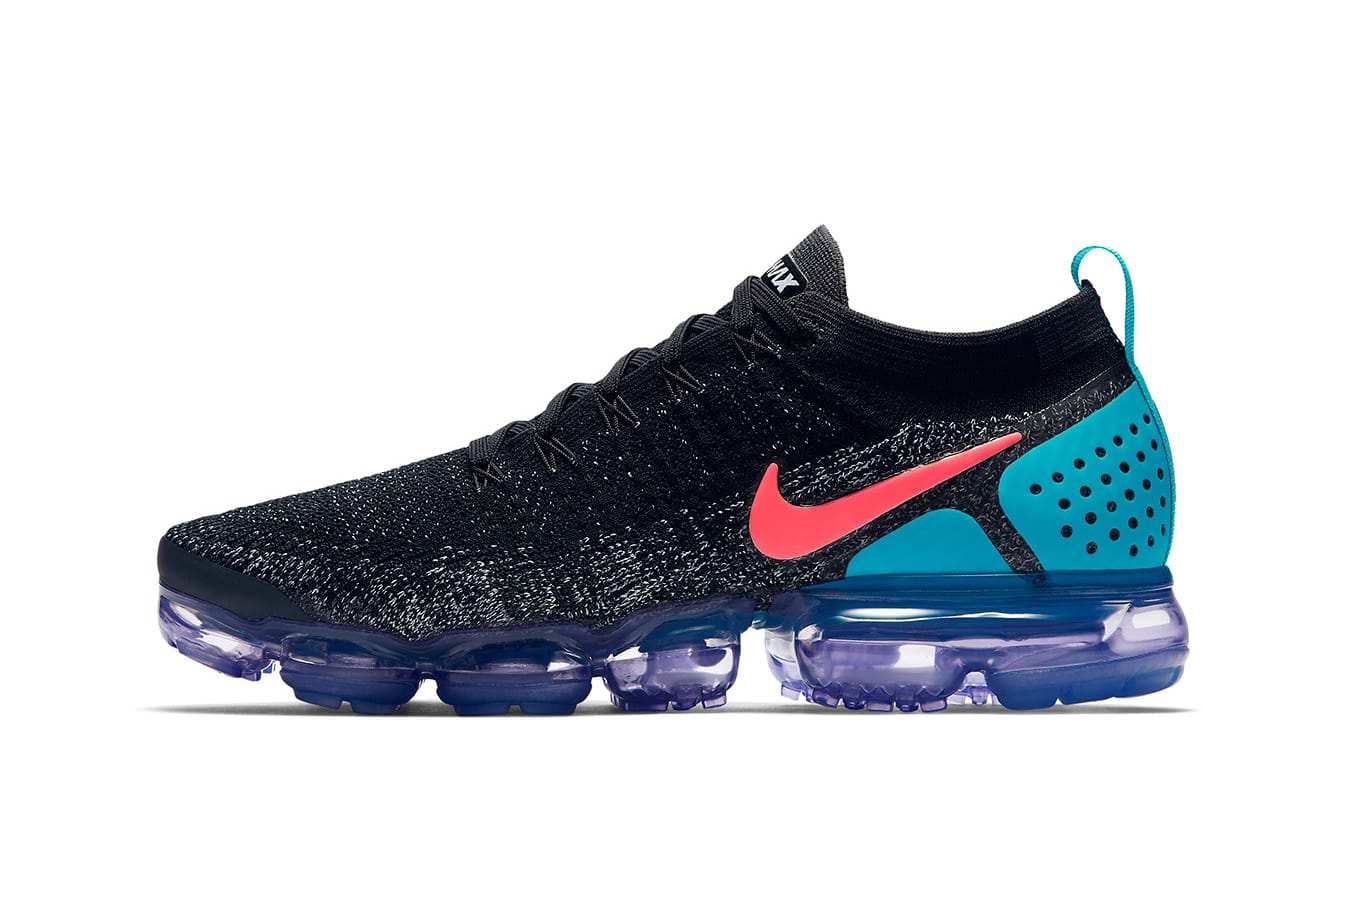 vapormax flyknit colorful